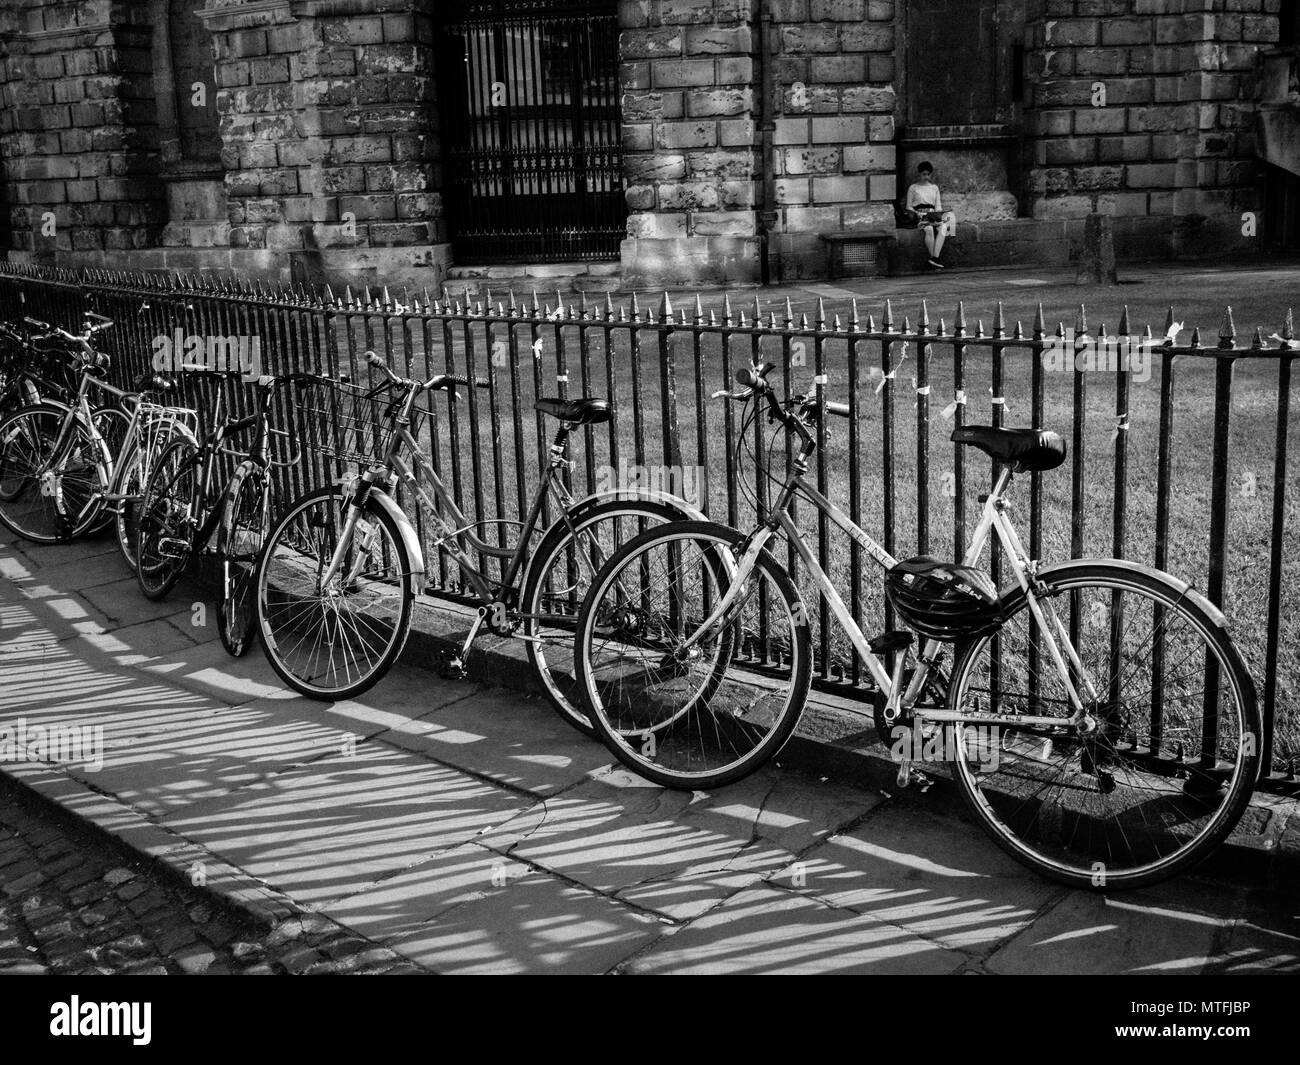 Bicycles on Railings Outside Radcliffe Camera, University of Oxford, Oxford, Oxfordshire, England, UK, GB. Stock Photo